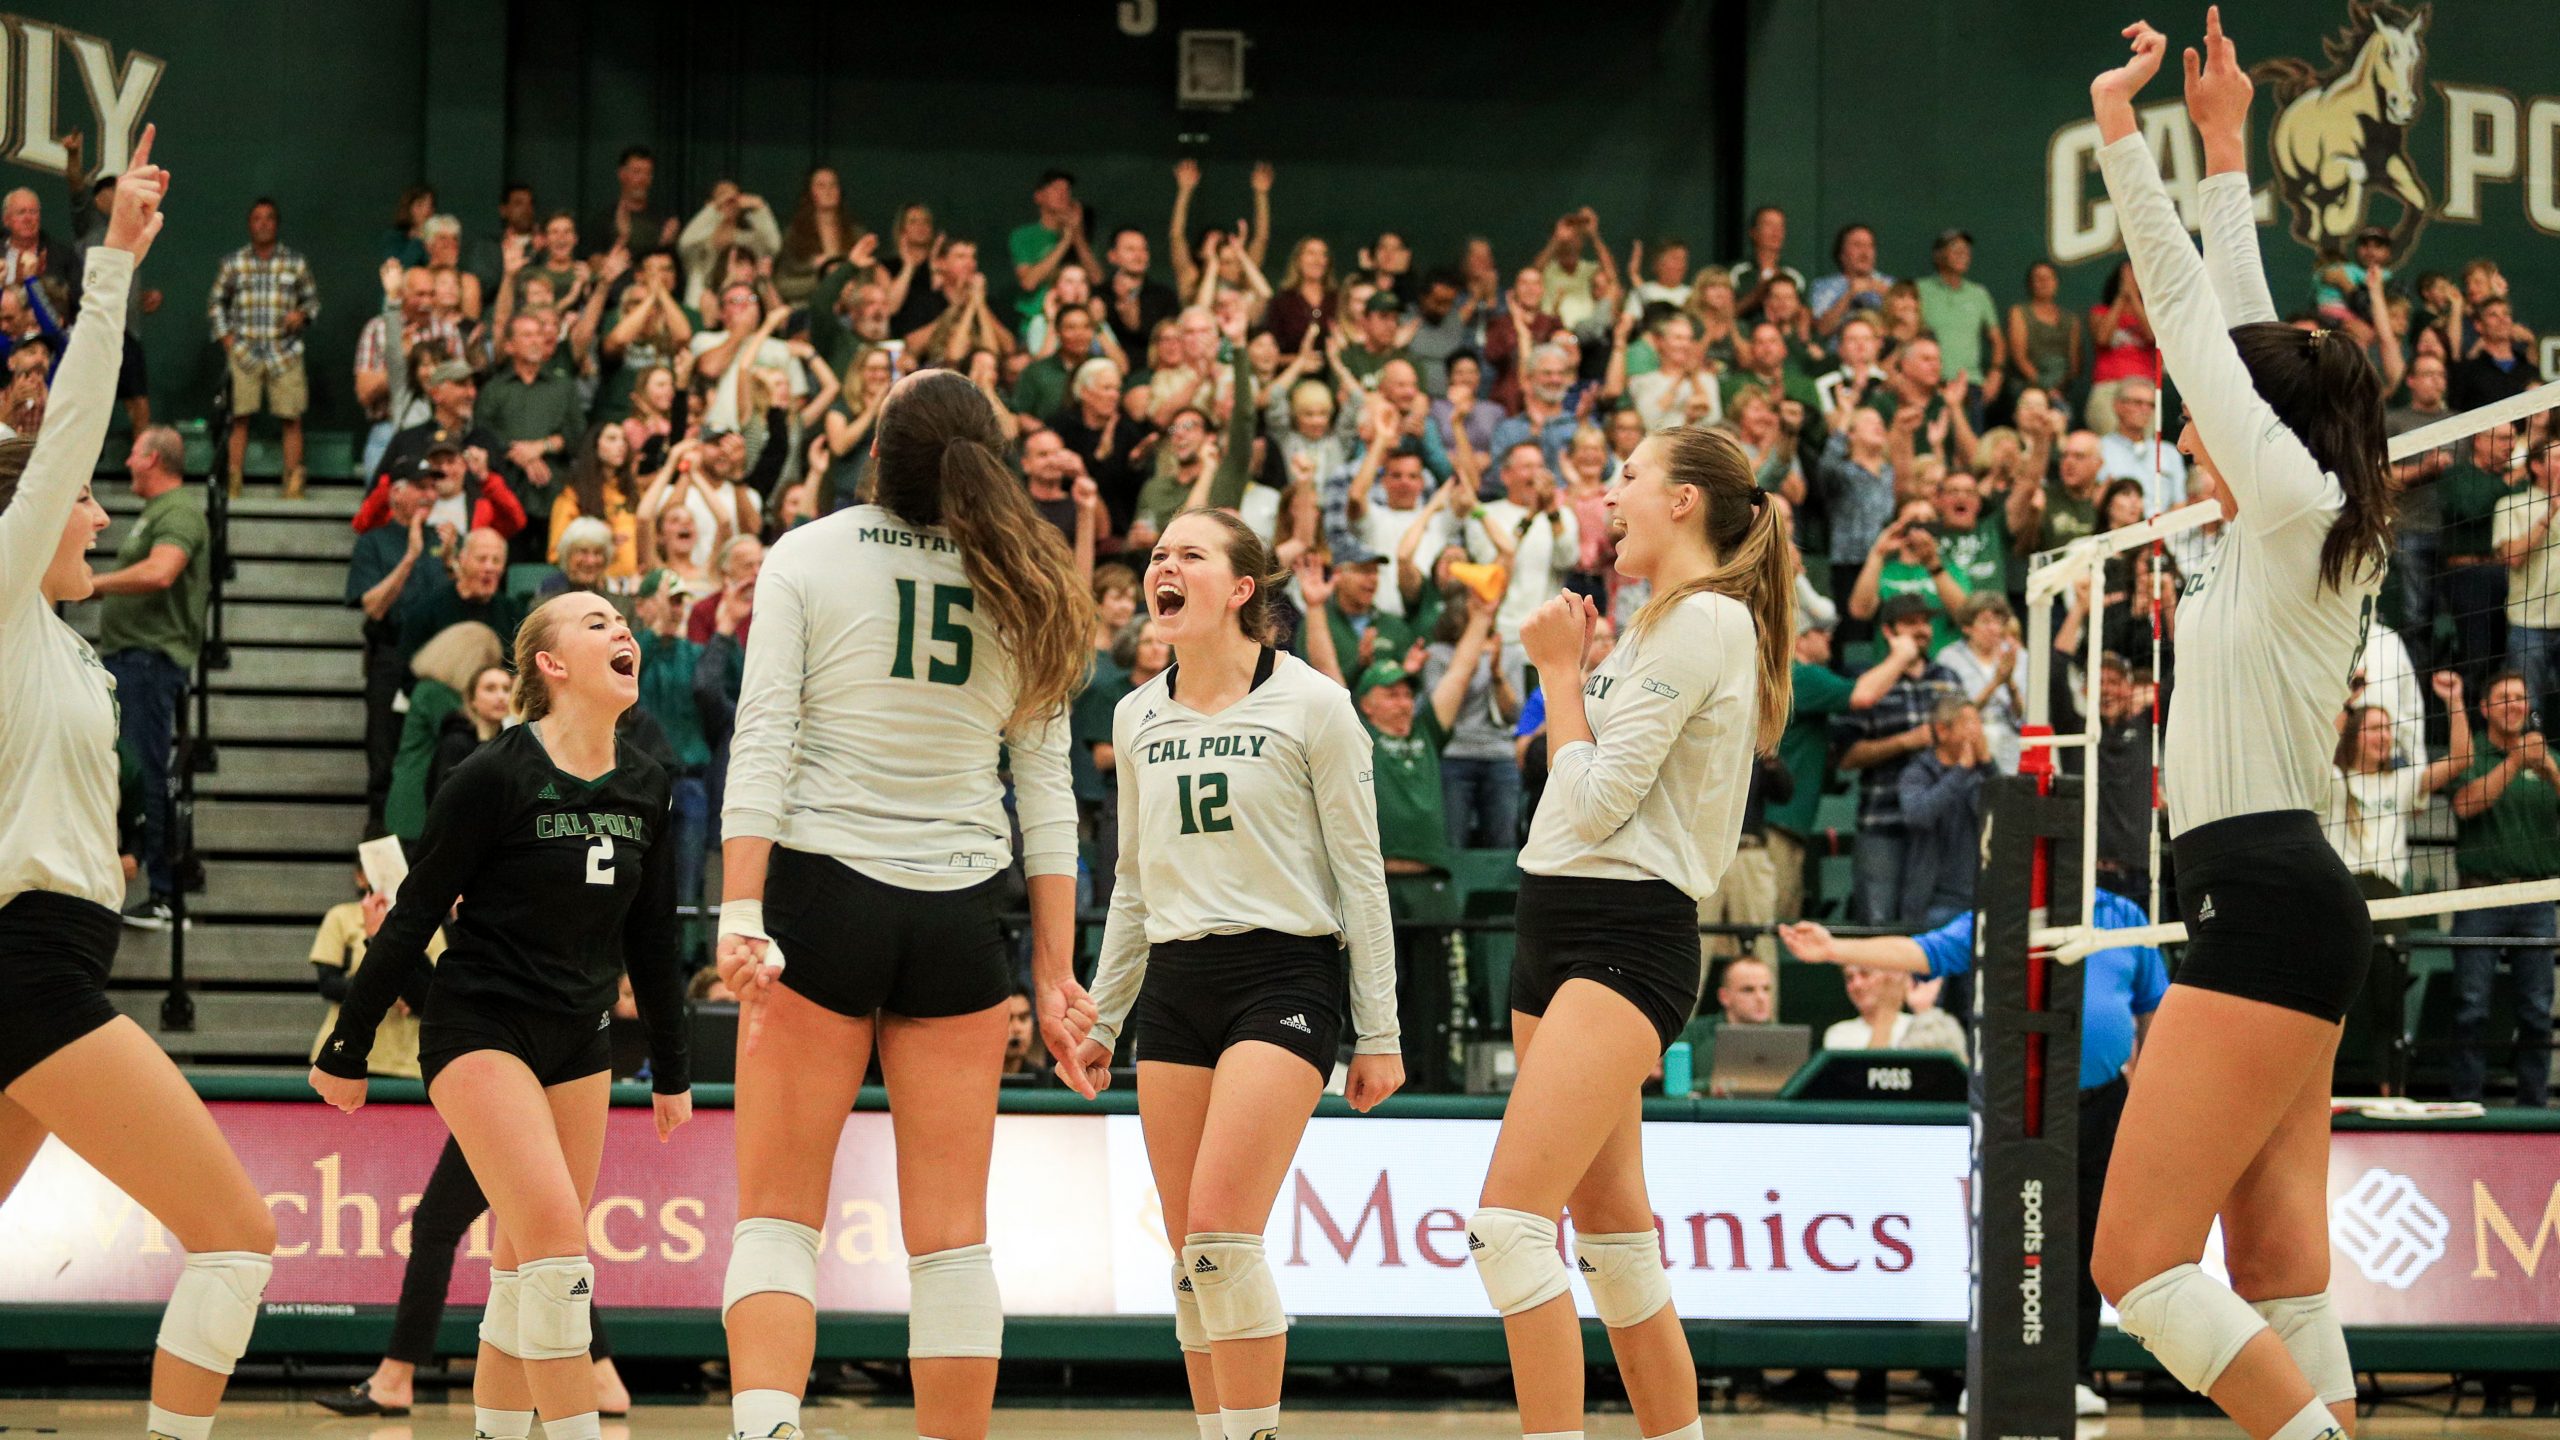 Athletes on Cal Poly's volleyball team celebrate a point in front of a crowd at Mott Athletic Center